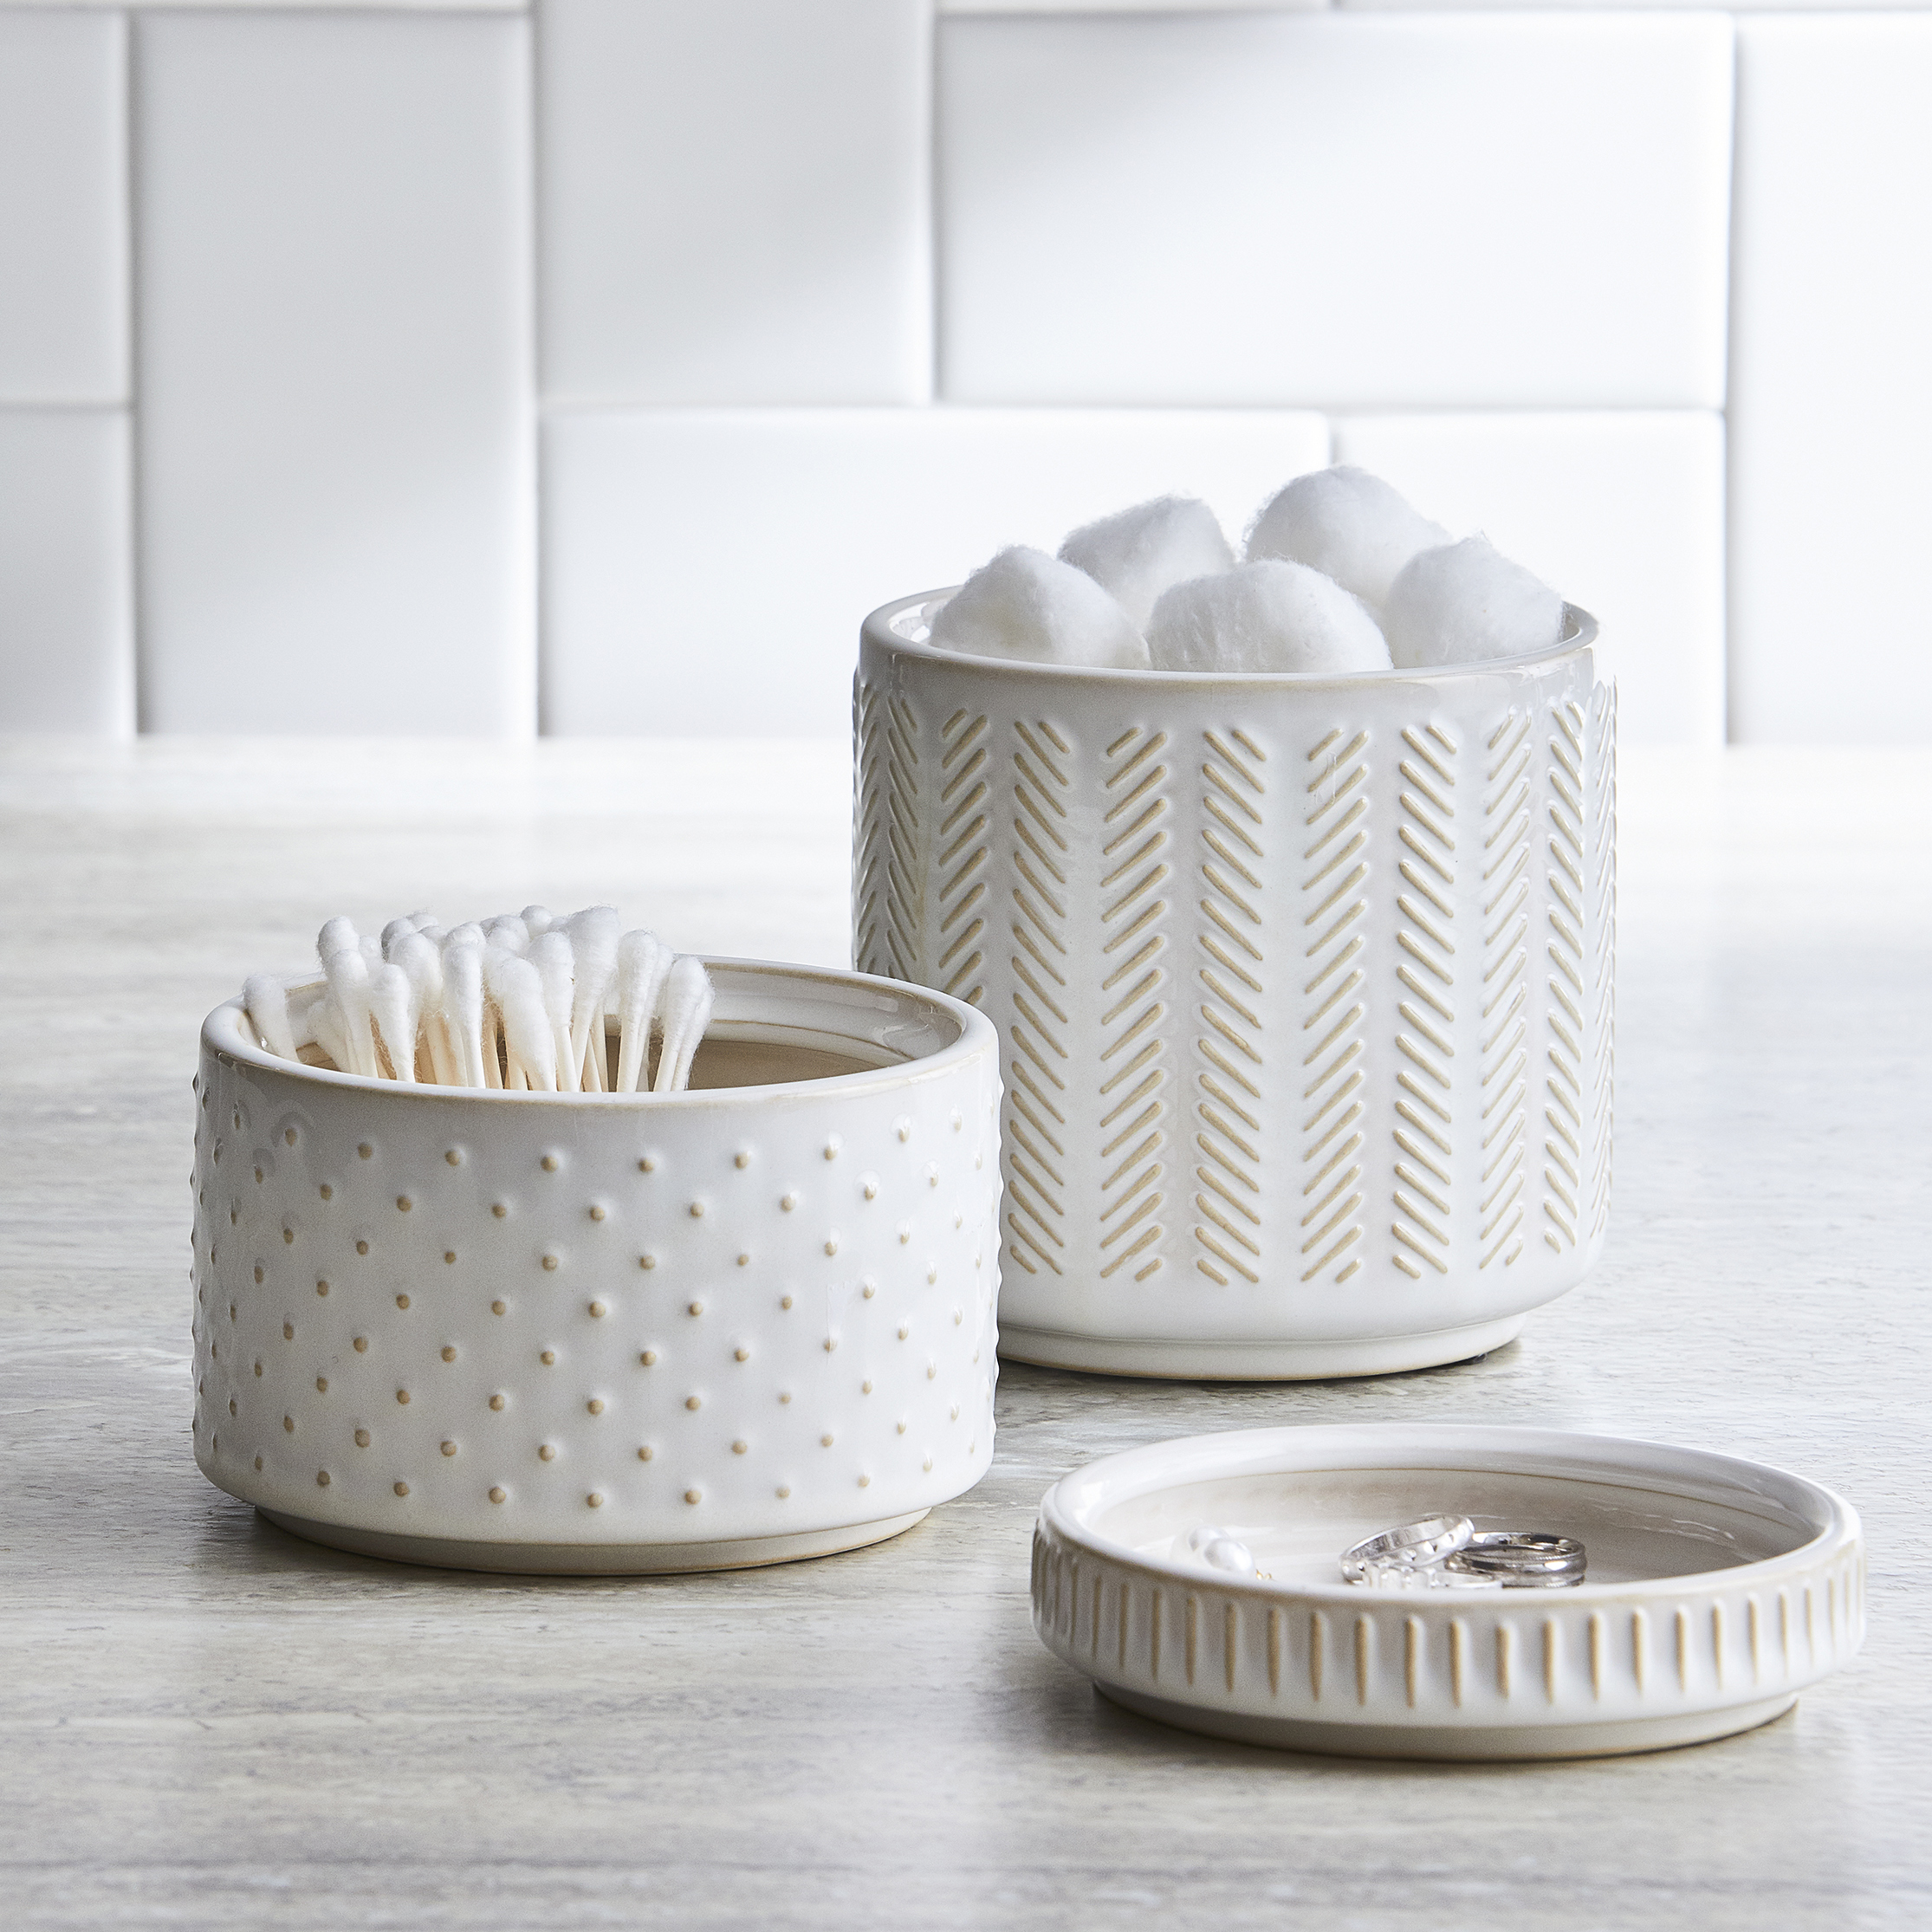 3-Piece Textured Ceramic Stackable Jar Set in Creamy White, Better Homes & Gardens - image 5 of 8